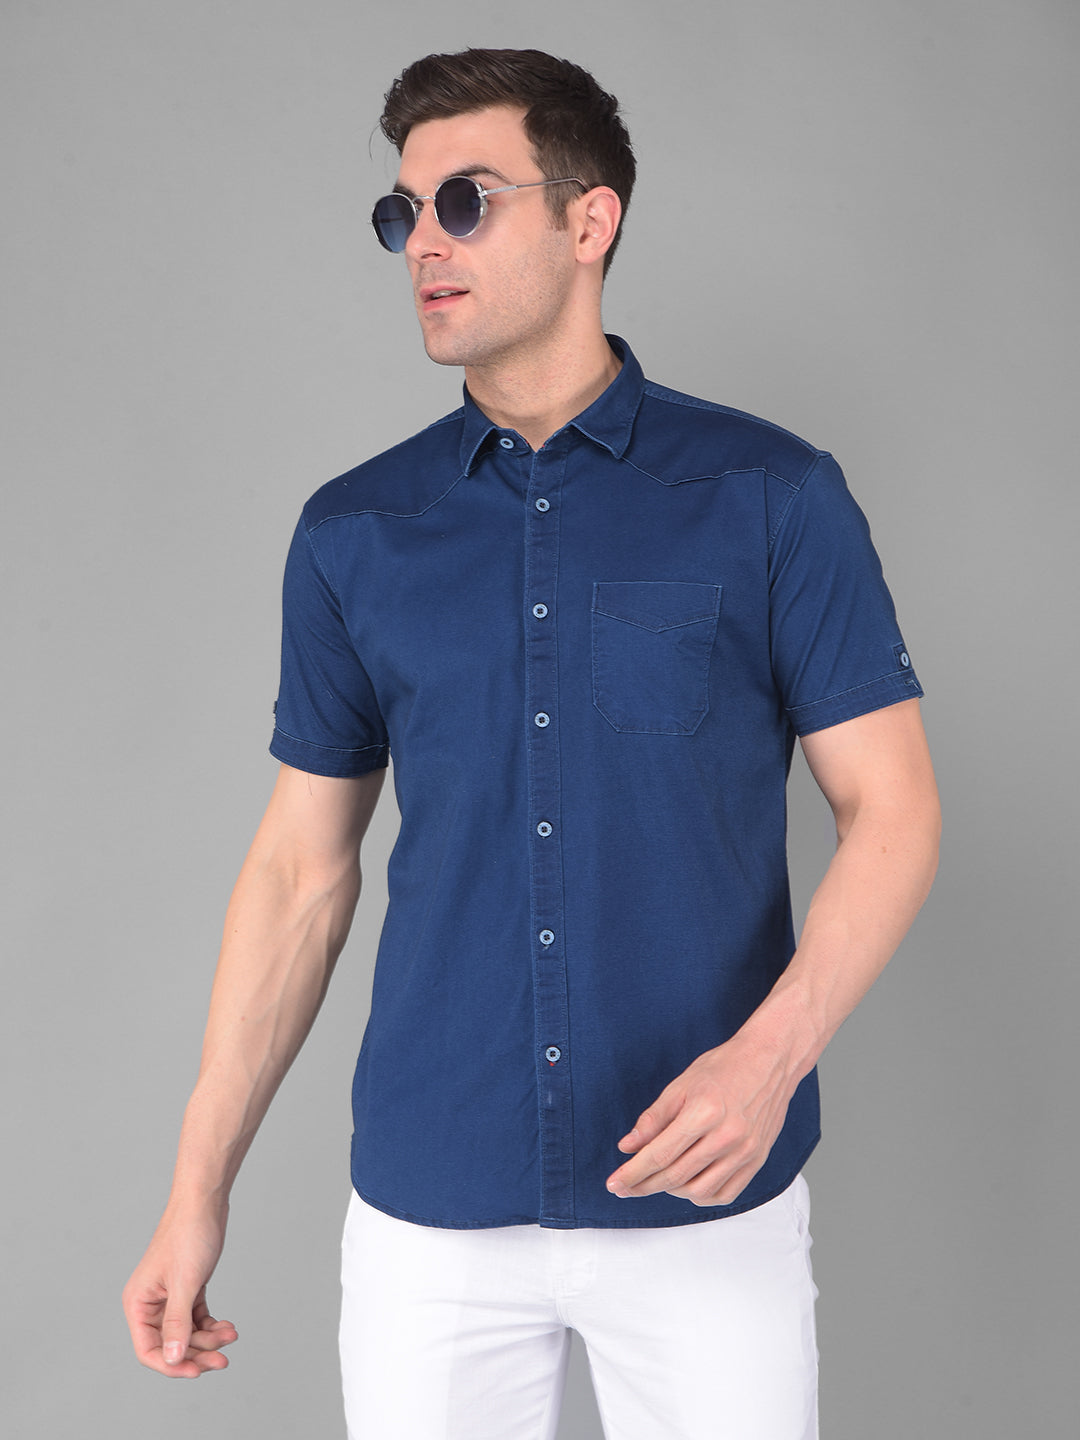 COBB SOLID NAVY BLUE HALF-SLEEVE STRETCH FIT CASUAL SHIRT